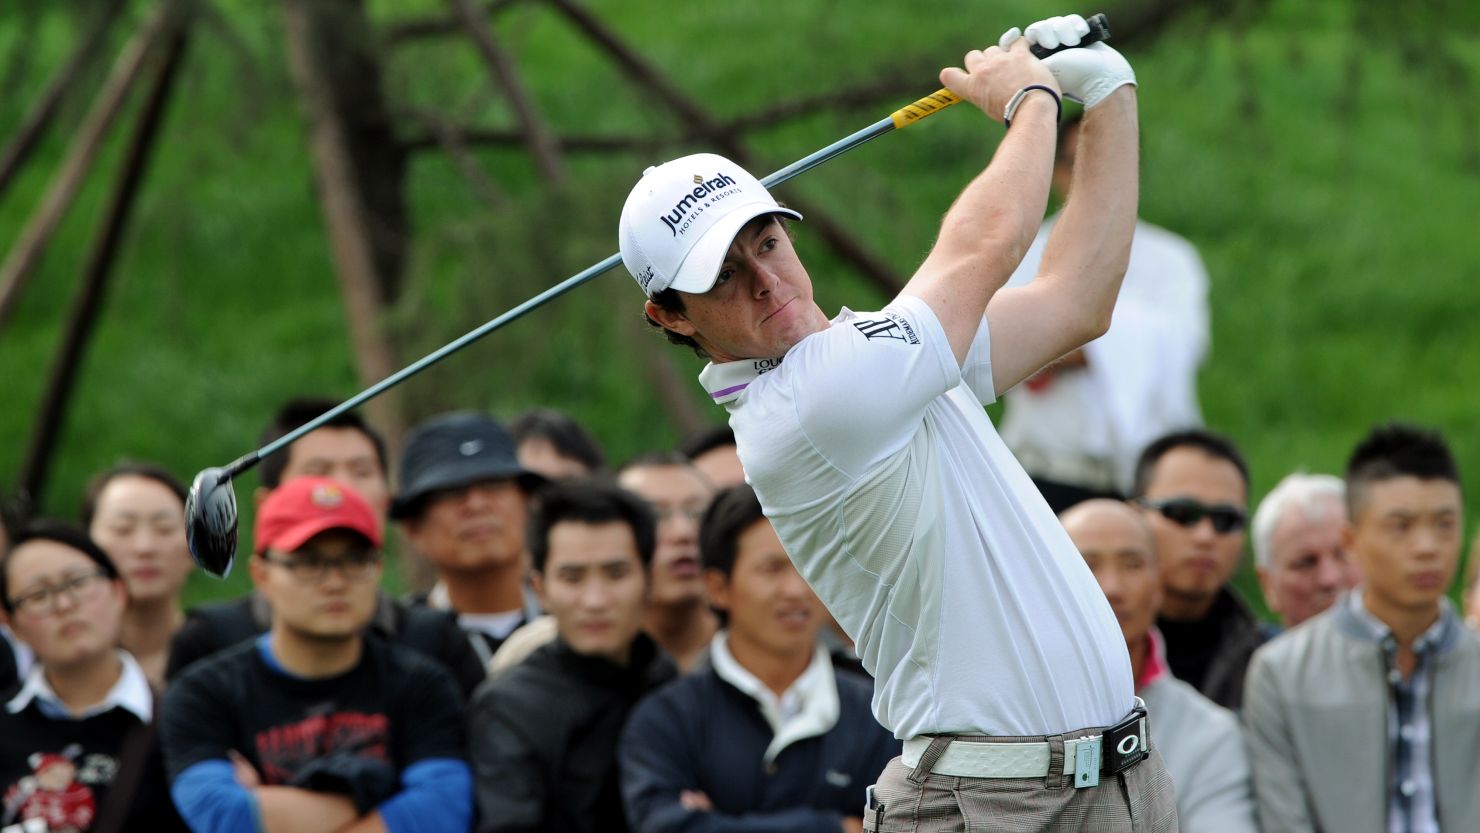 Northern Ireland's Rory McIlroy extended the one-shot lead he held after day one in Shanghai.